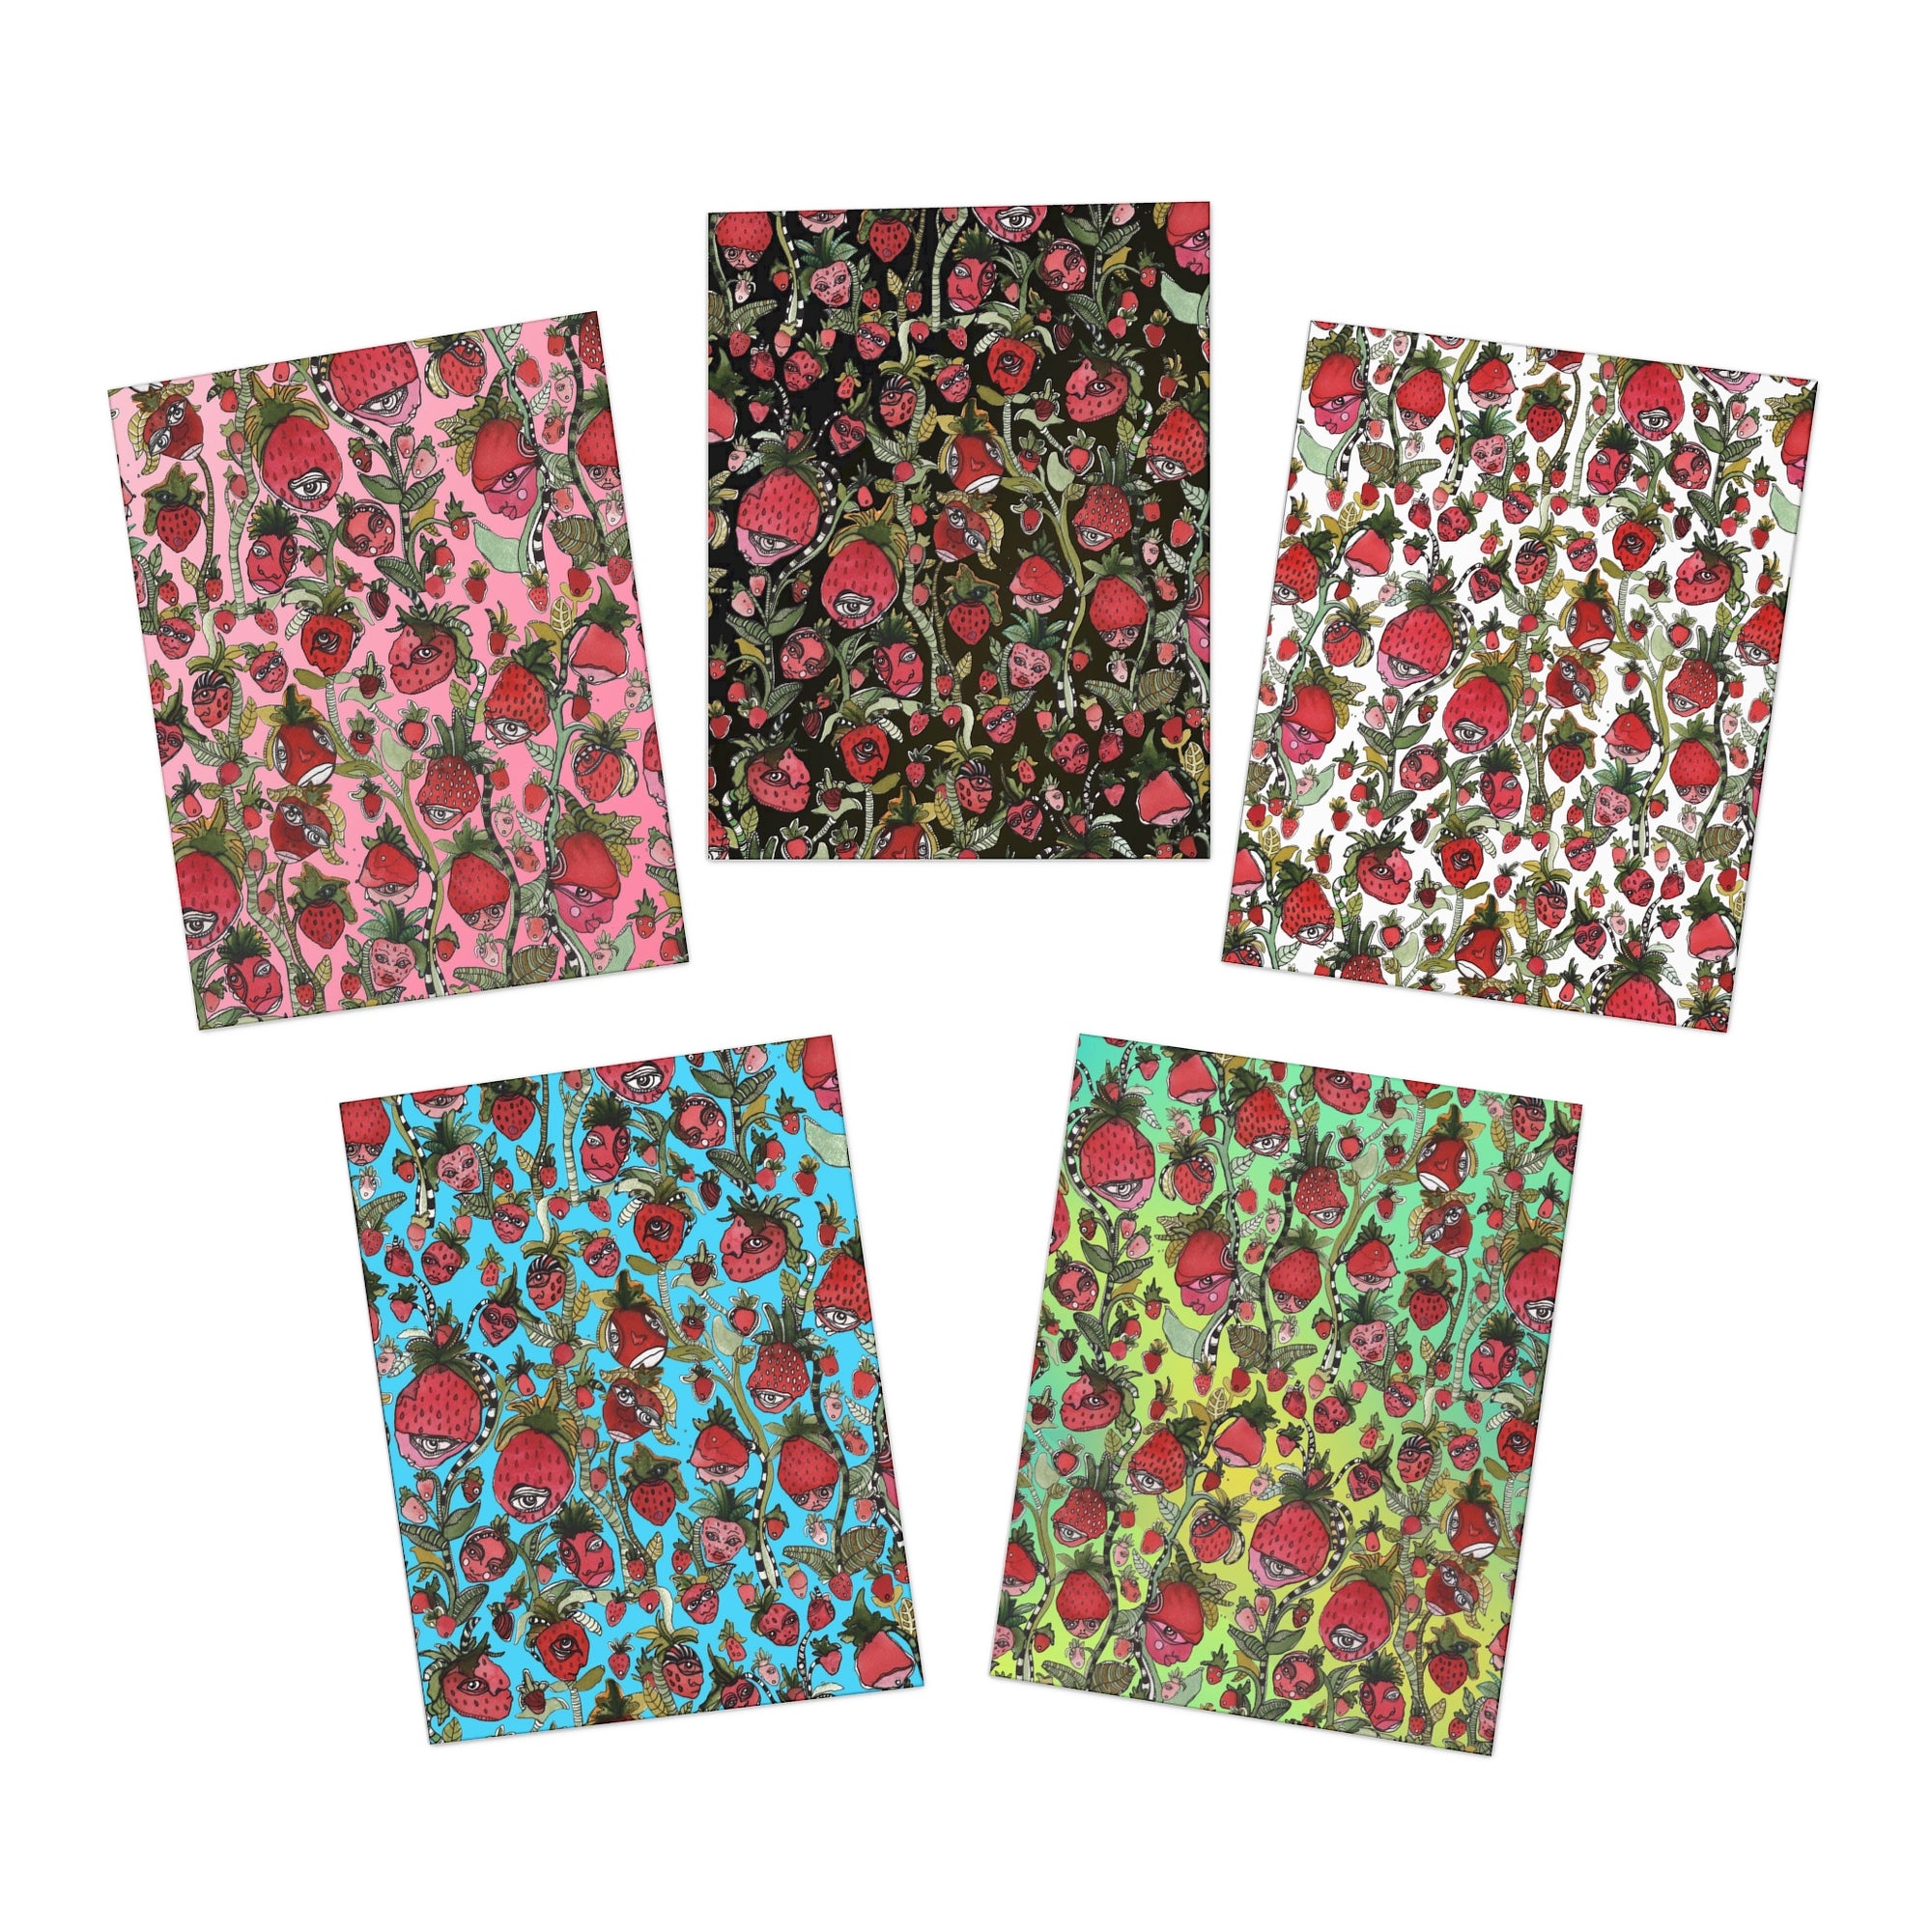 Art Greeting Cards 5 Pack Set with Envelopes Trippy Intuitive Mixed Media Artwork Psychedelic Colorful Unique - Frame them Blank Inside